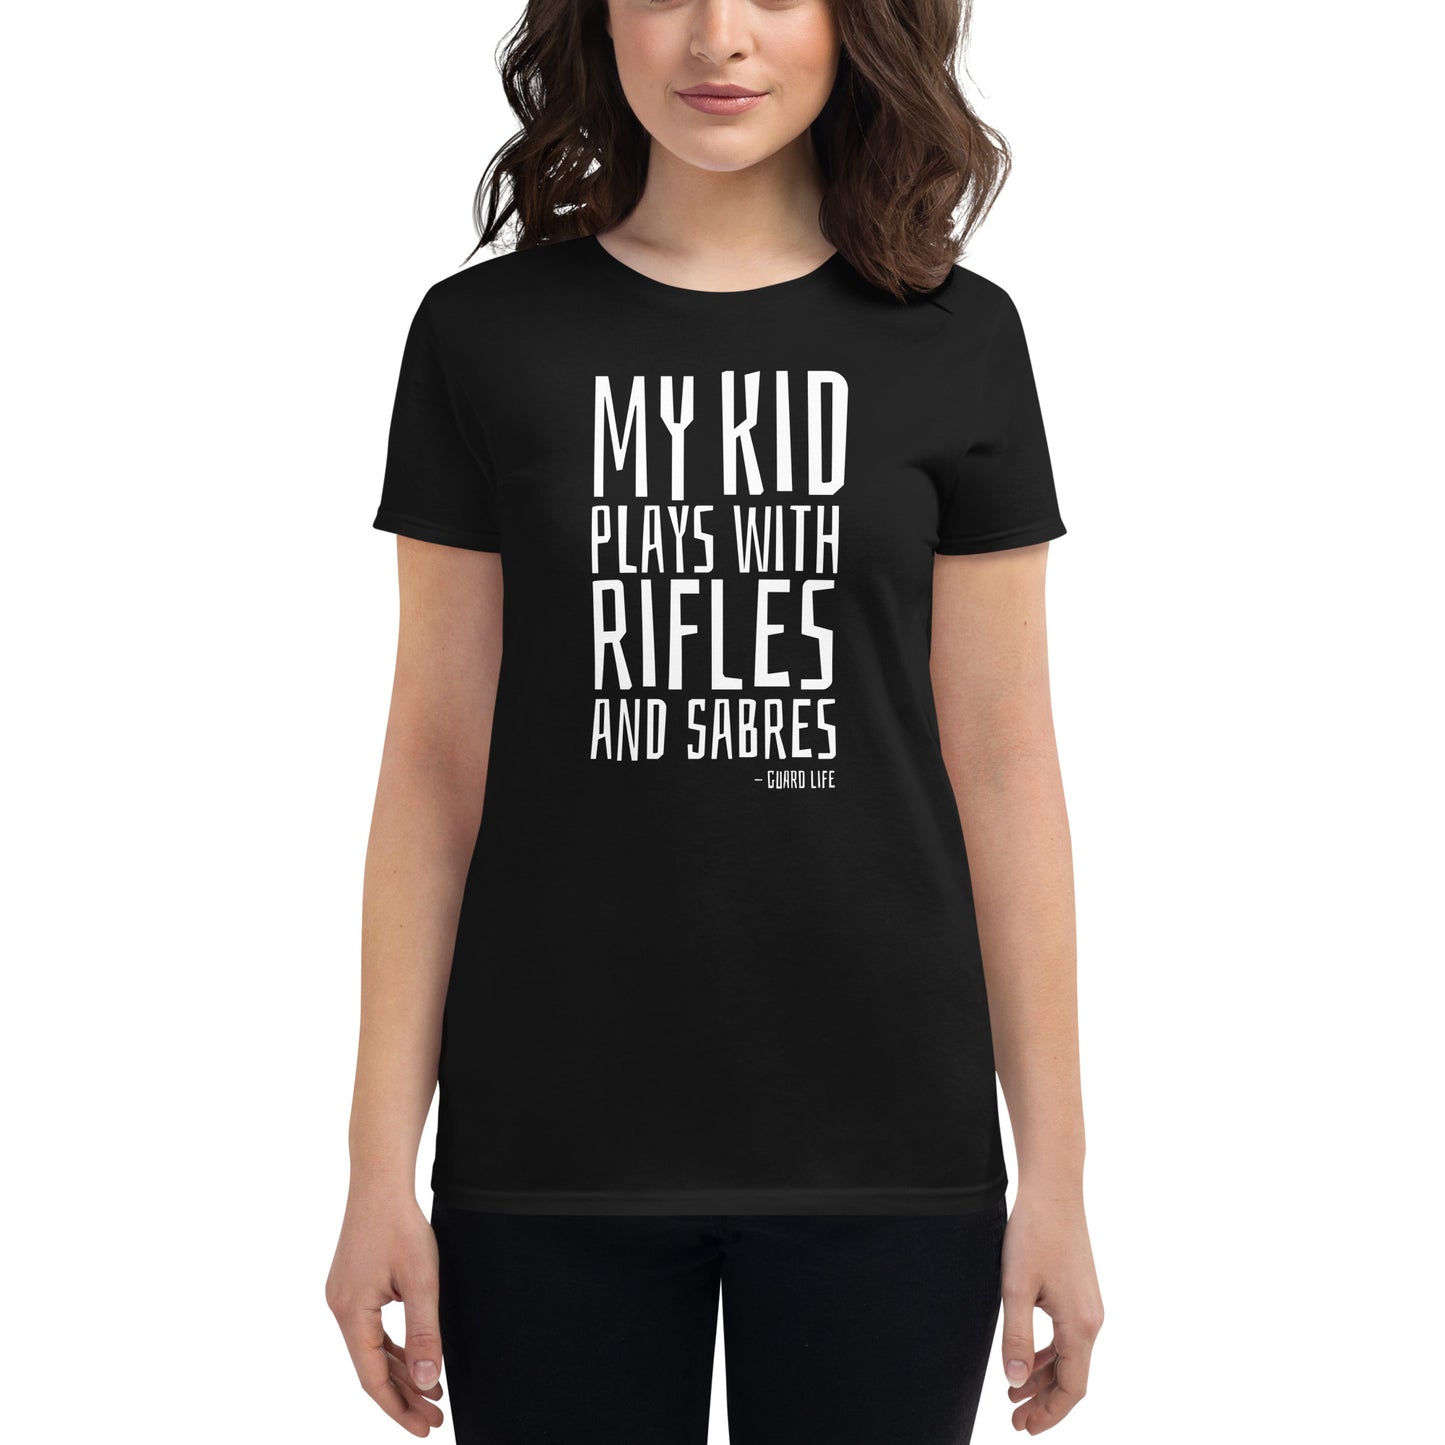 My kid plays with rifles and sabres (Color Guard) Women's Fashion Fit T-shirt